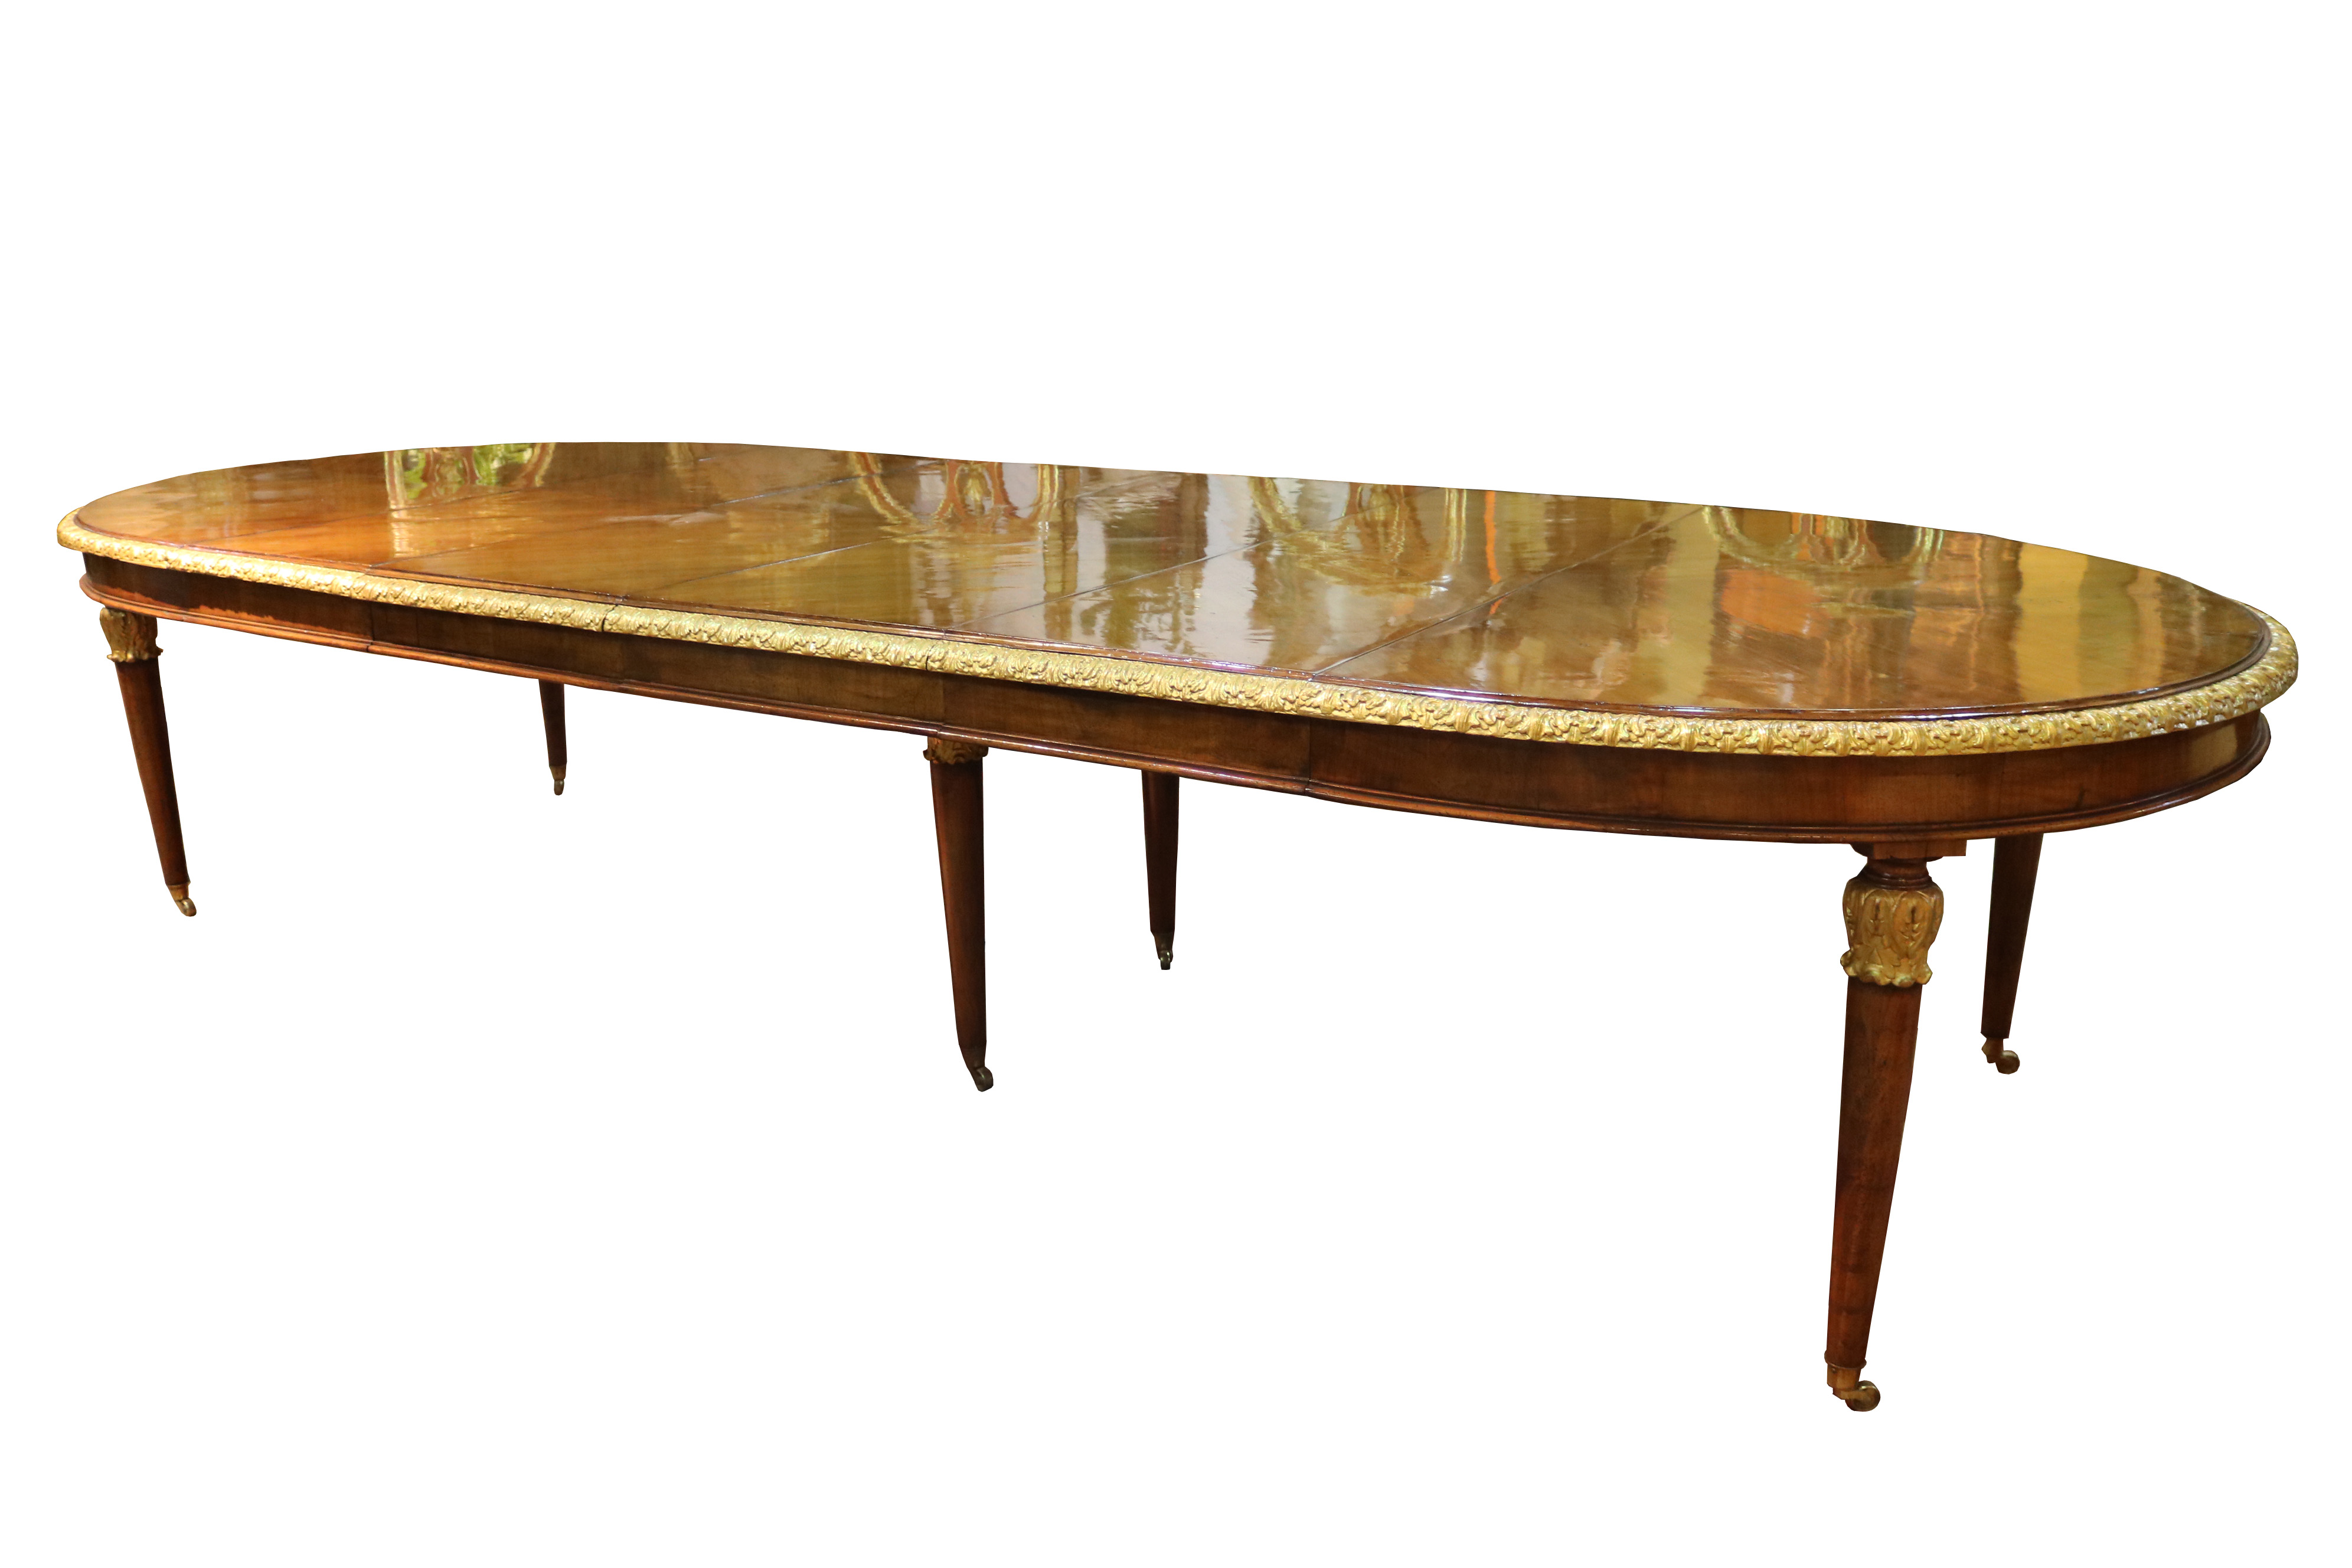 A Fine Late 18th Century Italian Walnut and Parcel Gilt Dining Table No.4782